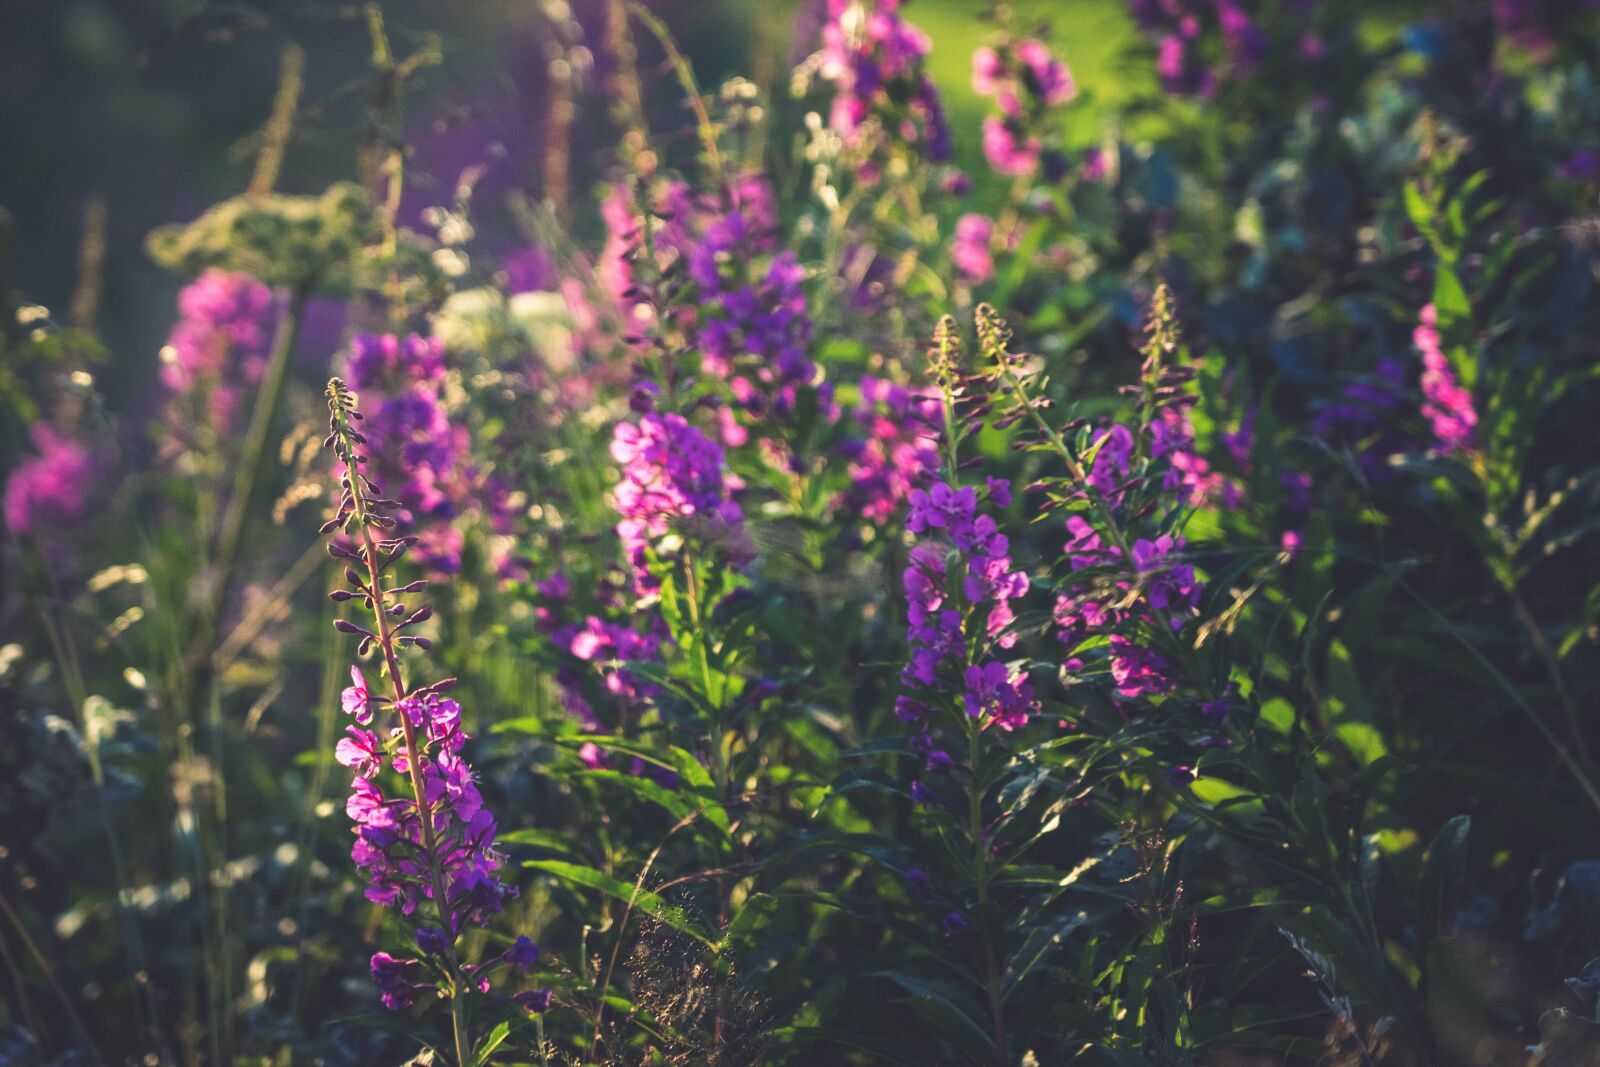 Sony a7 II + Sony FE 24-105mm F4 G OSS sample photo. Landscape, flowers, nature photography